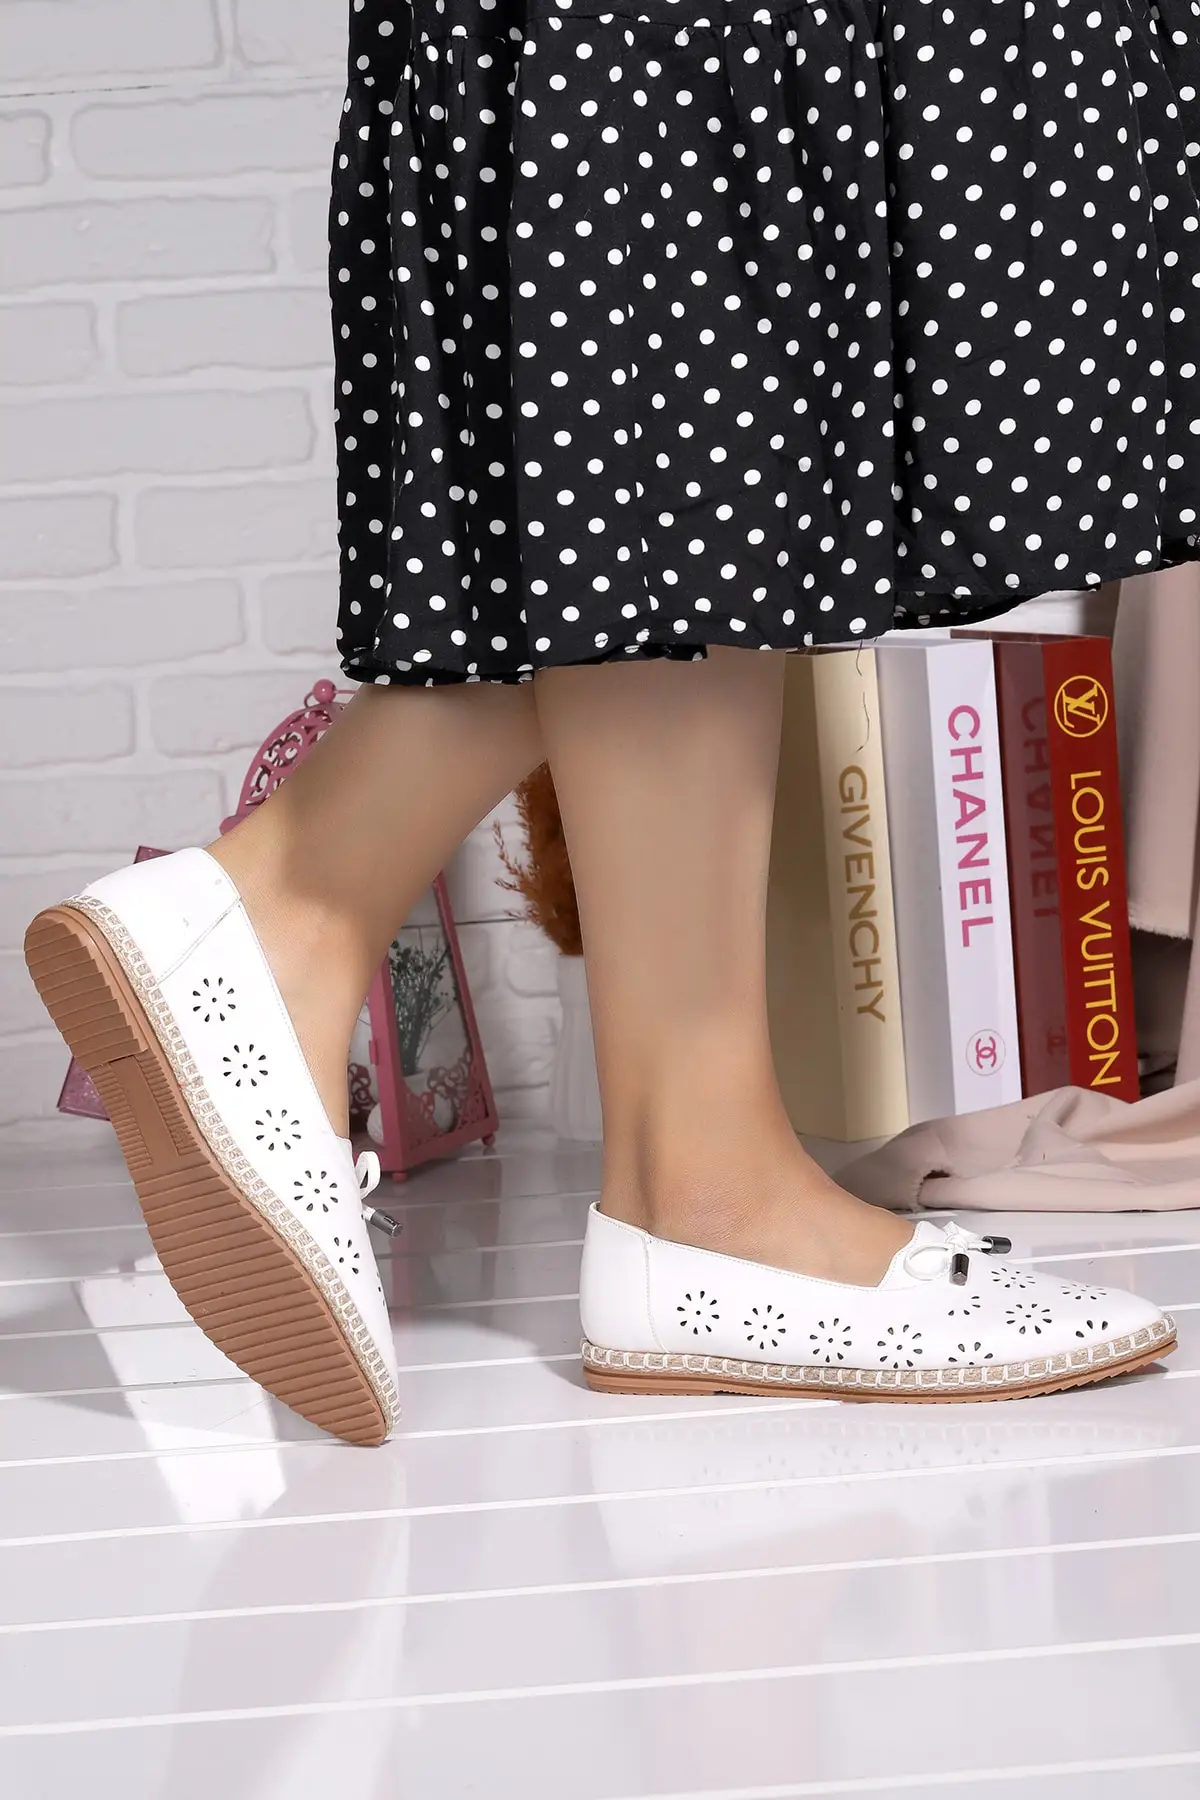 

Women Flats Shoes - Volume Daily Anatomical White Fashion Flats For Ladies Casual Shoes Elegant Flat Summer Footwear